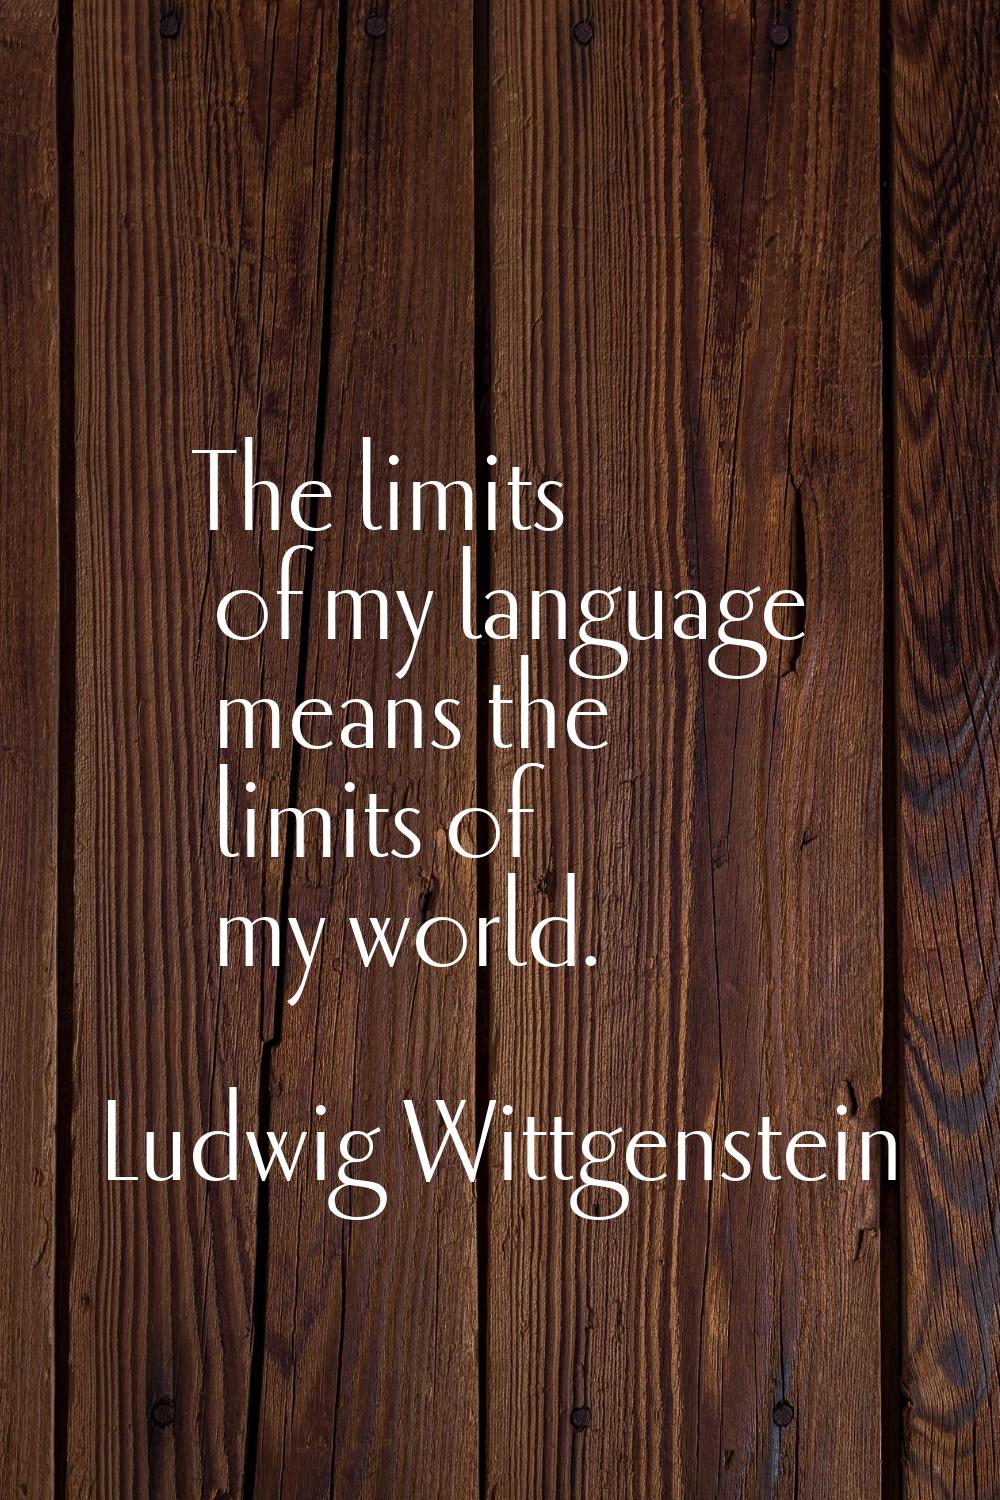 The limits of my language means the limits of my world.